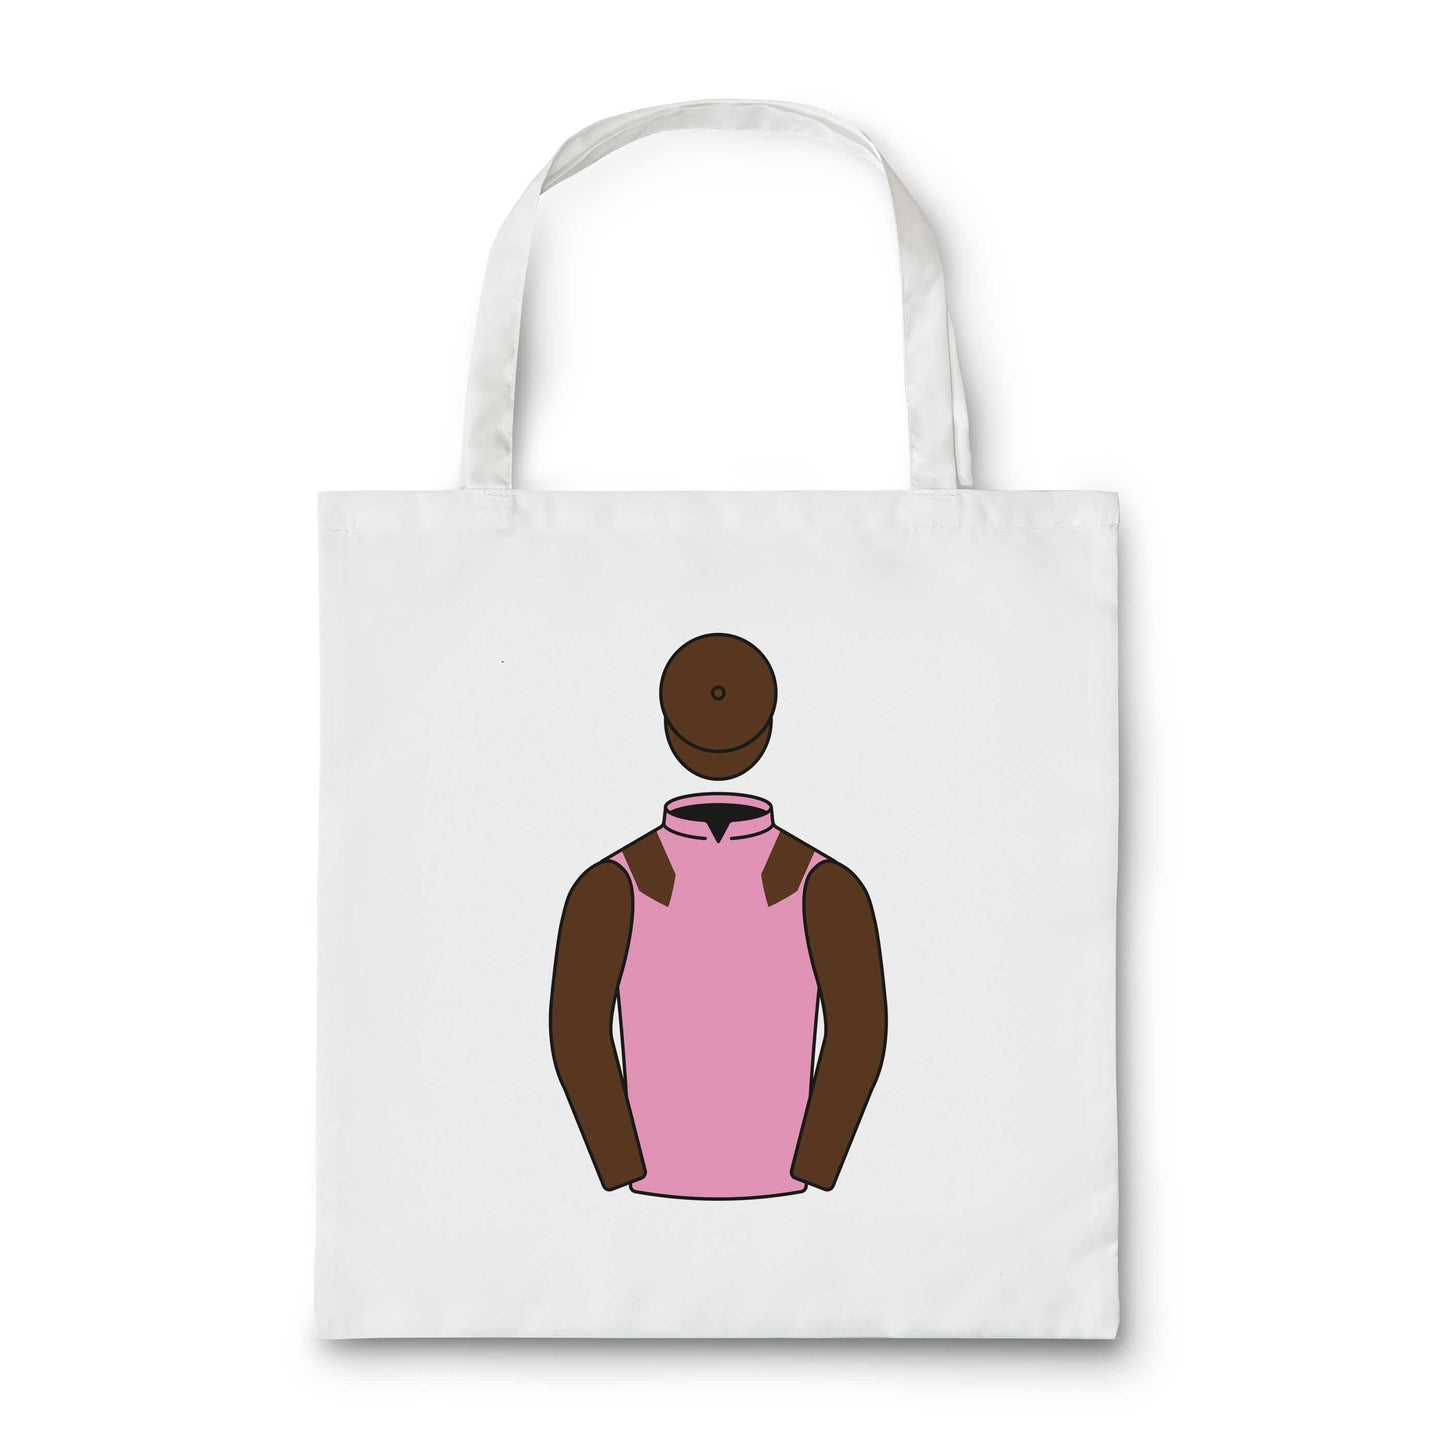 Mrs Suzanne Lawrence Tote Bag - Tote Bag - Hacked Up